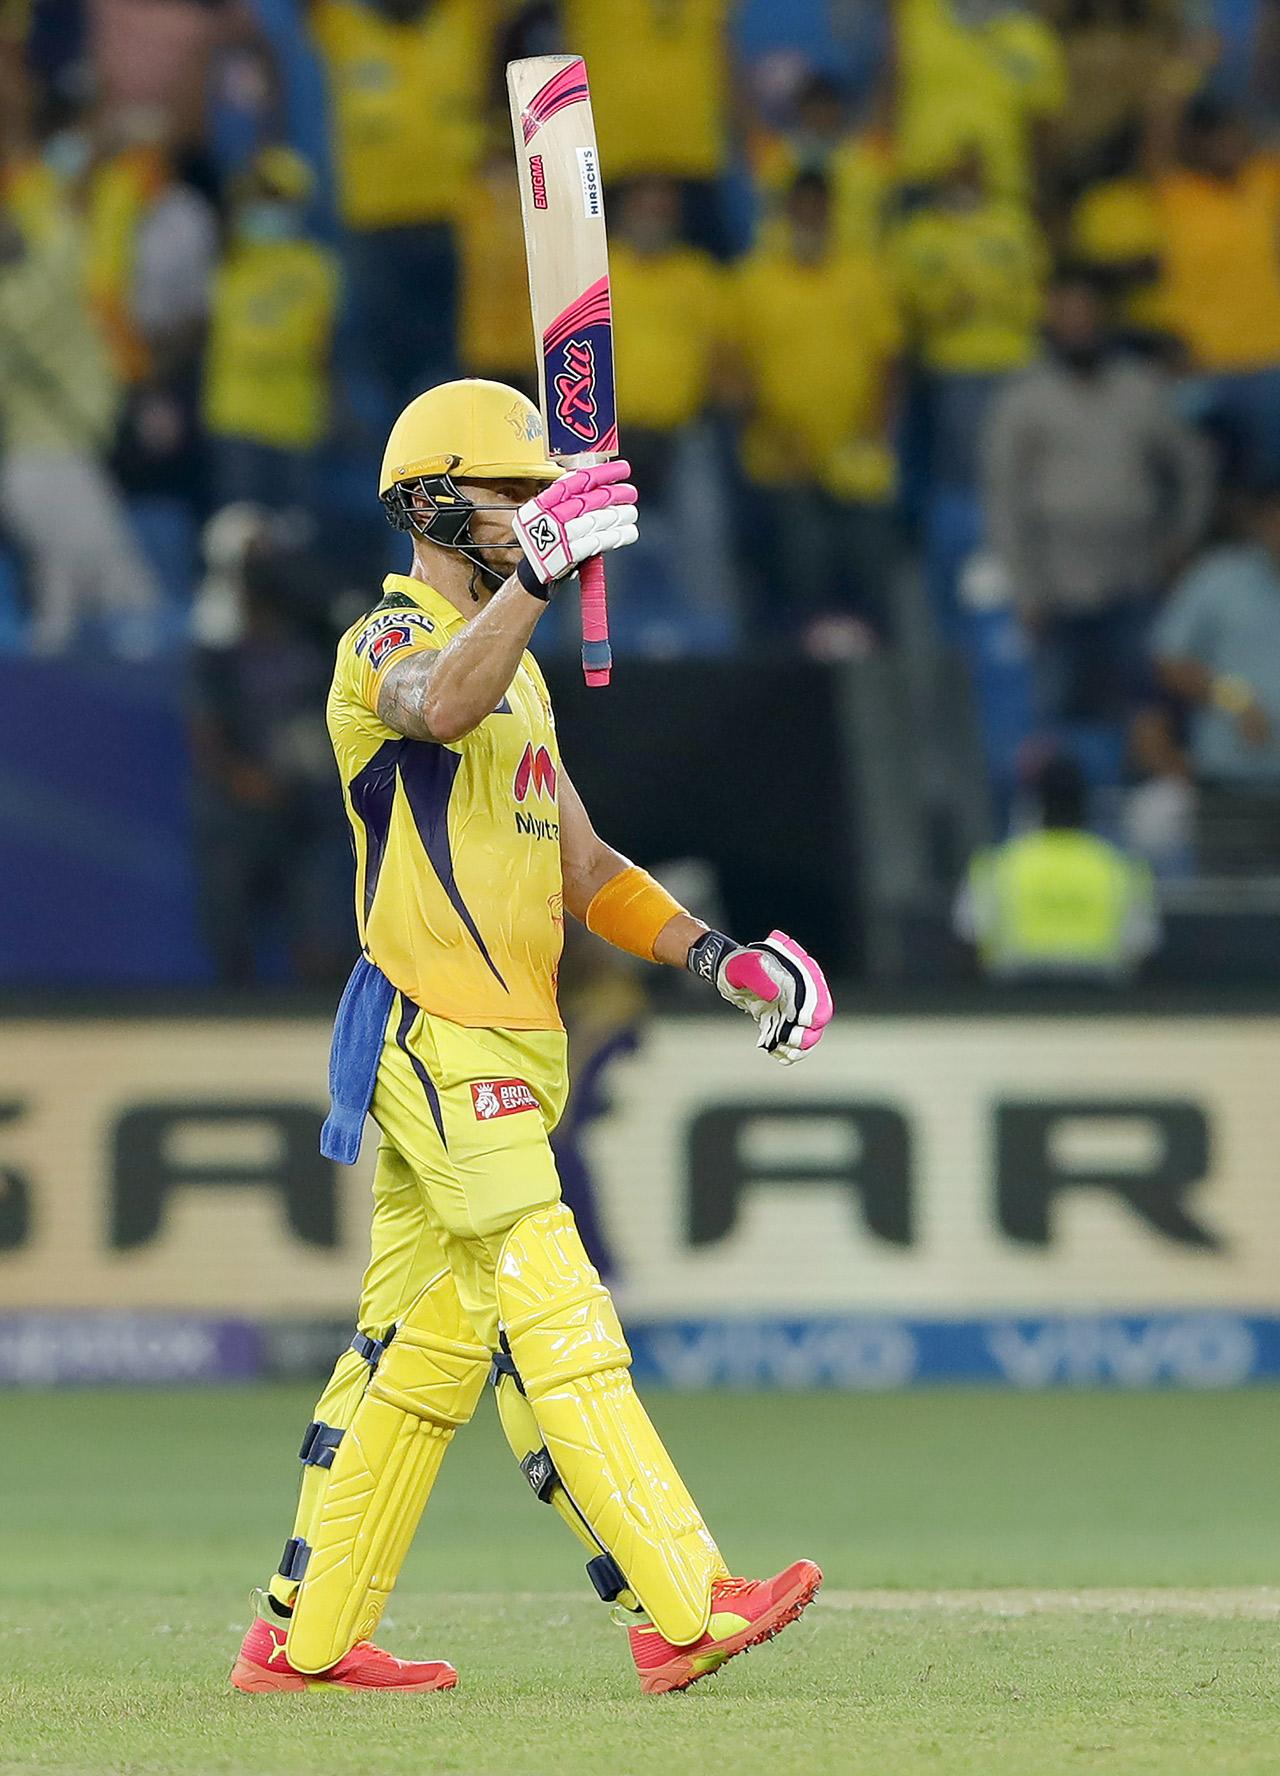 CSK's experienced player Faf du Plessis scored a brilliant 86 runs in the IPL 2021 final against KKR to take his team to 192 and also won the man of the match award. Du Plessis was close to also win the Orange Cap but fell short by 3 runs